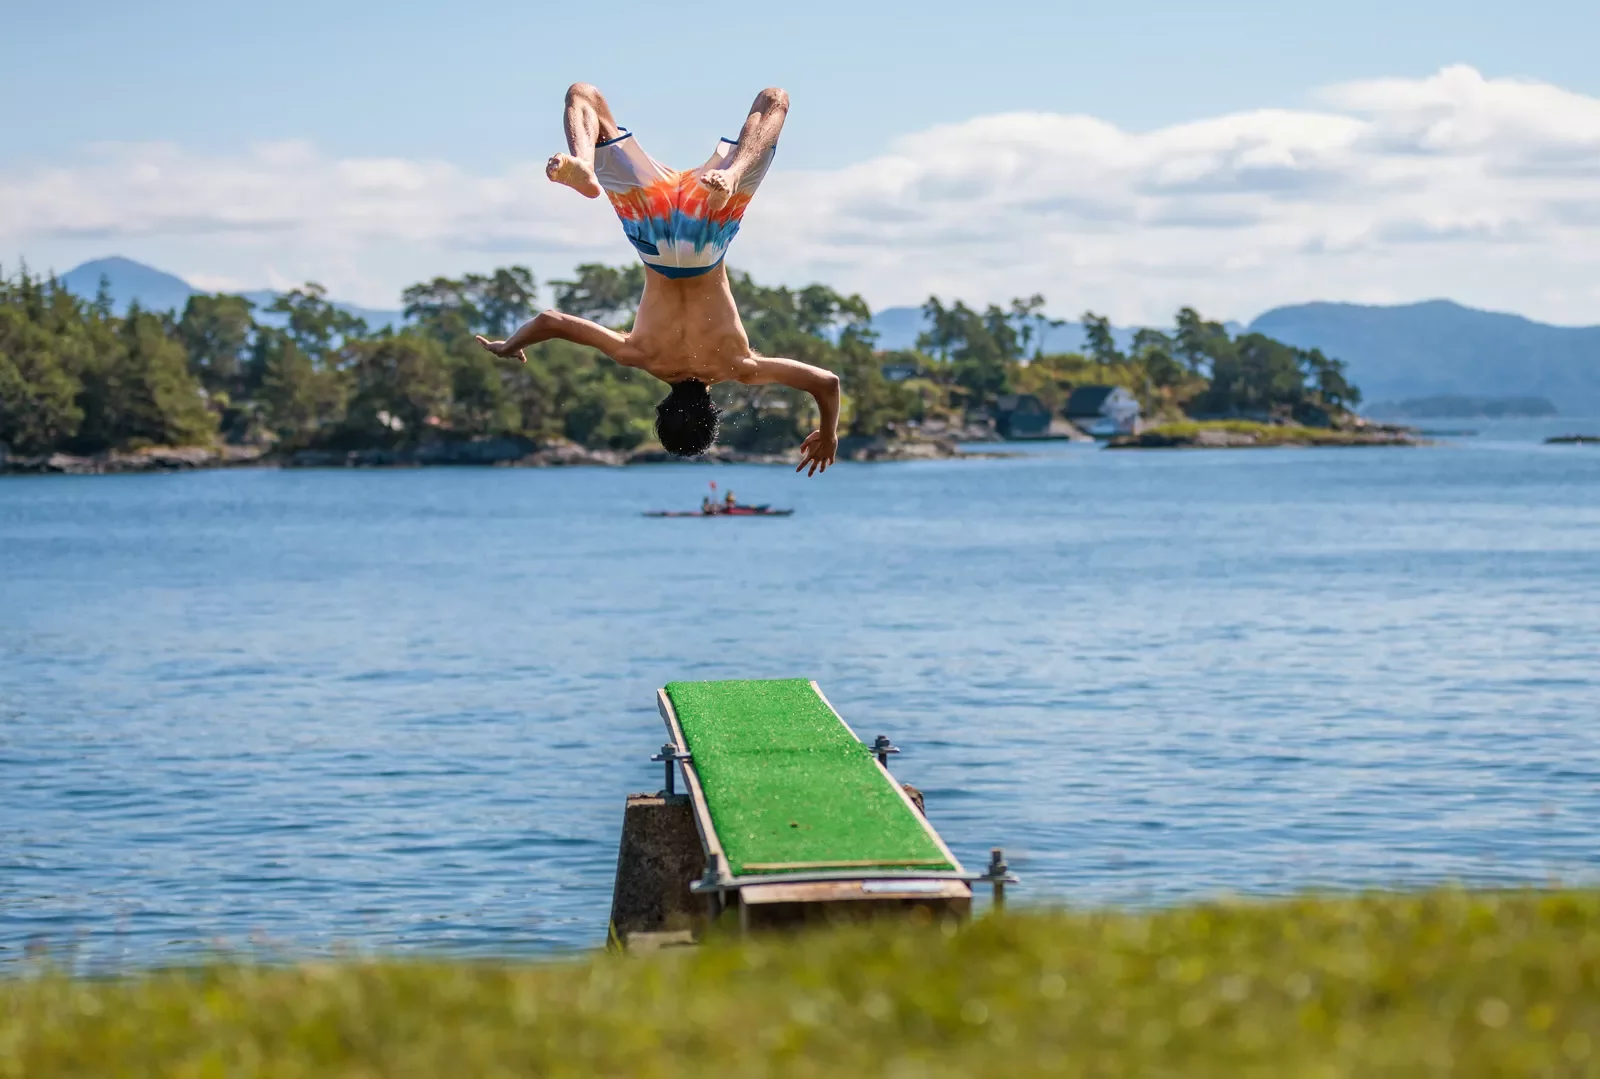 Man backflipping from the ledge into a lake